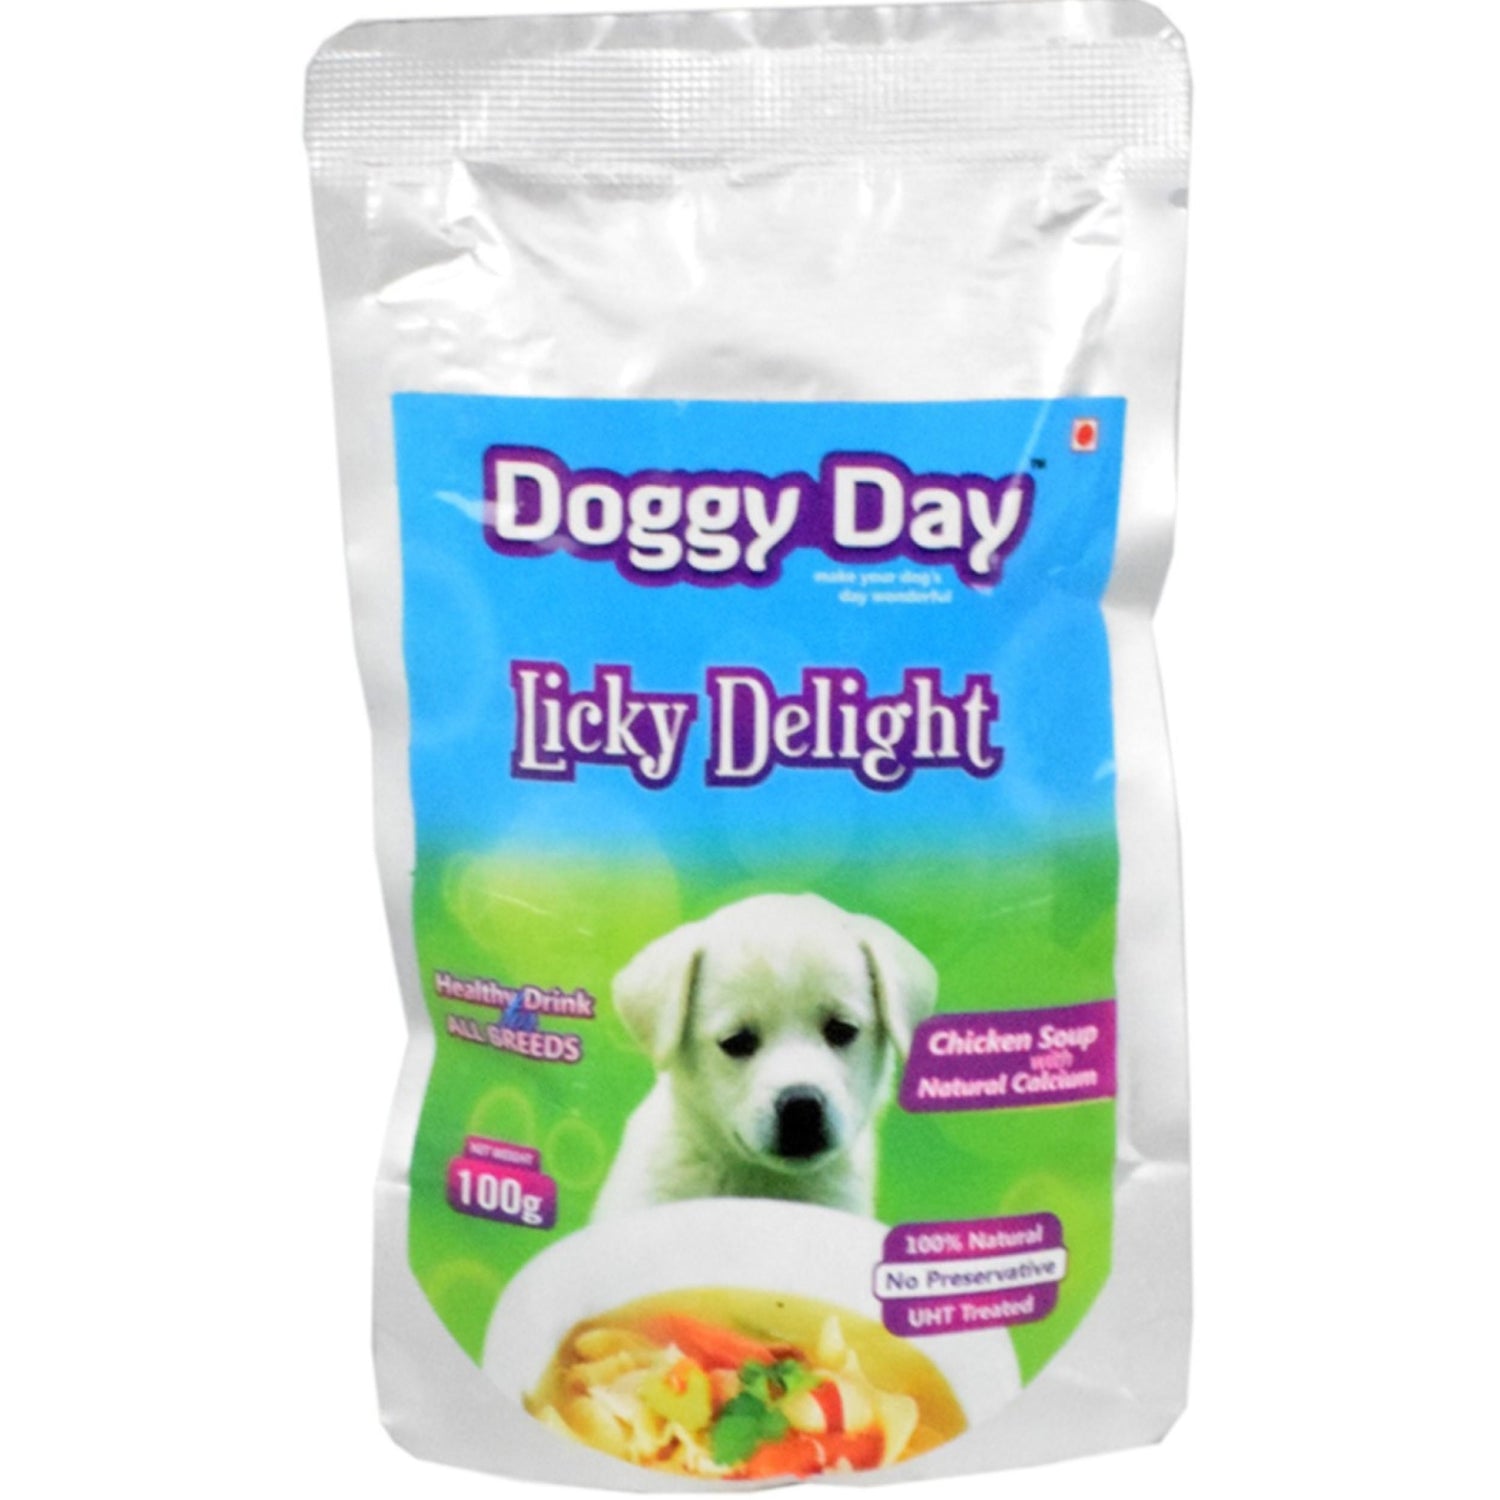 Doggy Day Licky Delight Chicken Soup With Calcium Gravy 100gm - 12packs